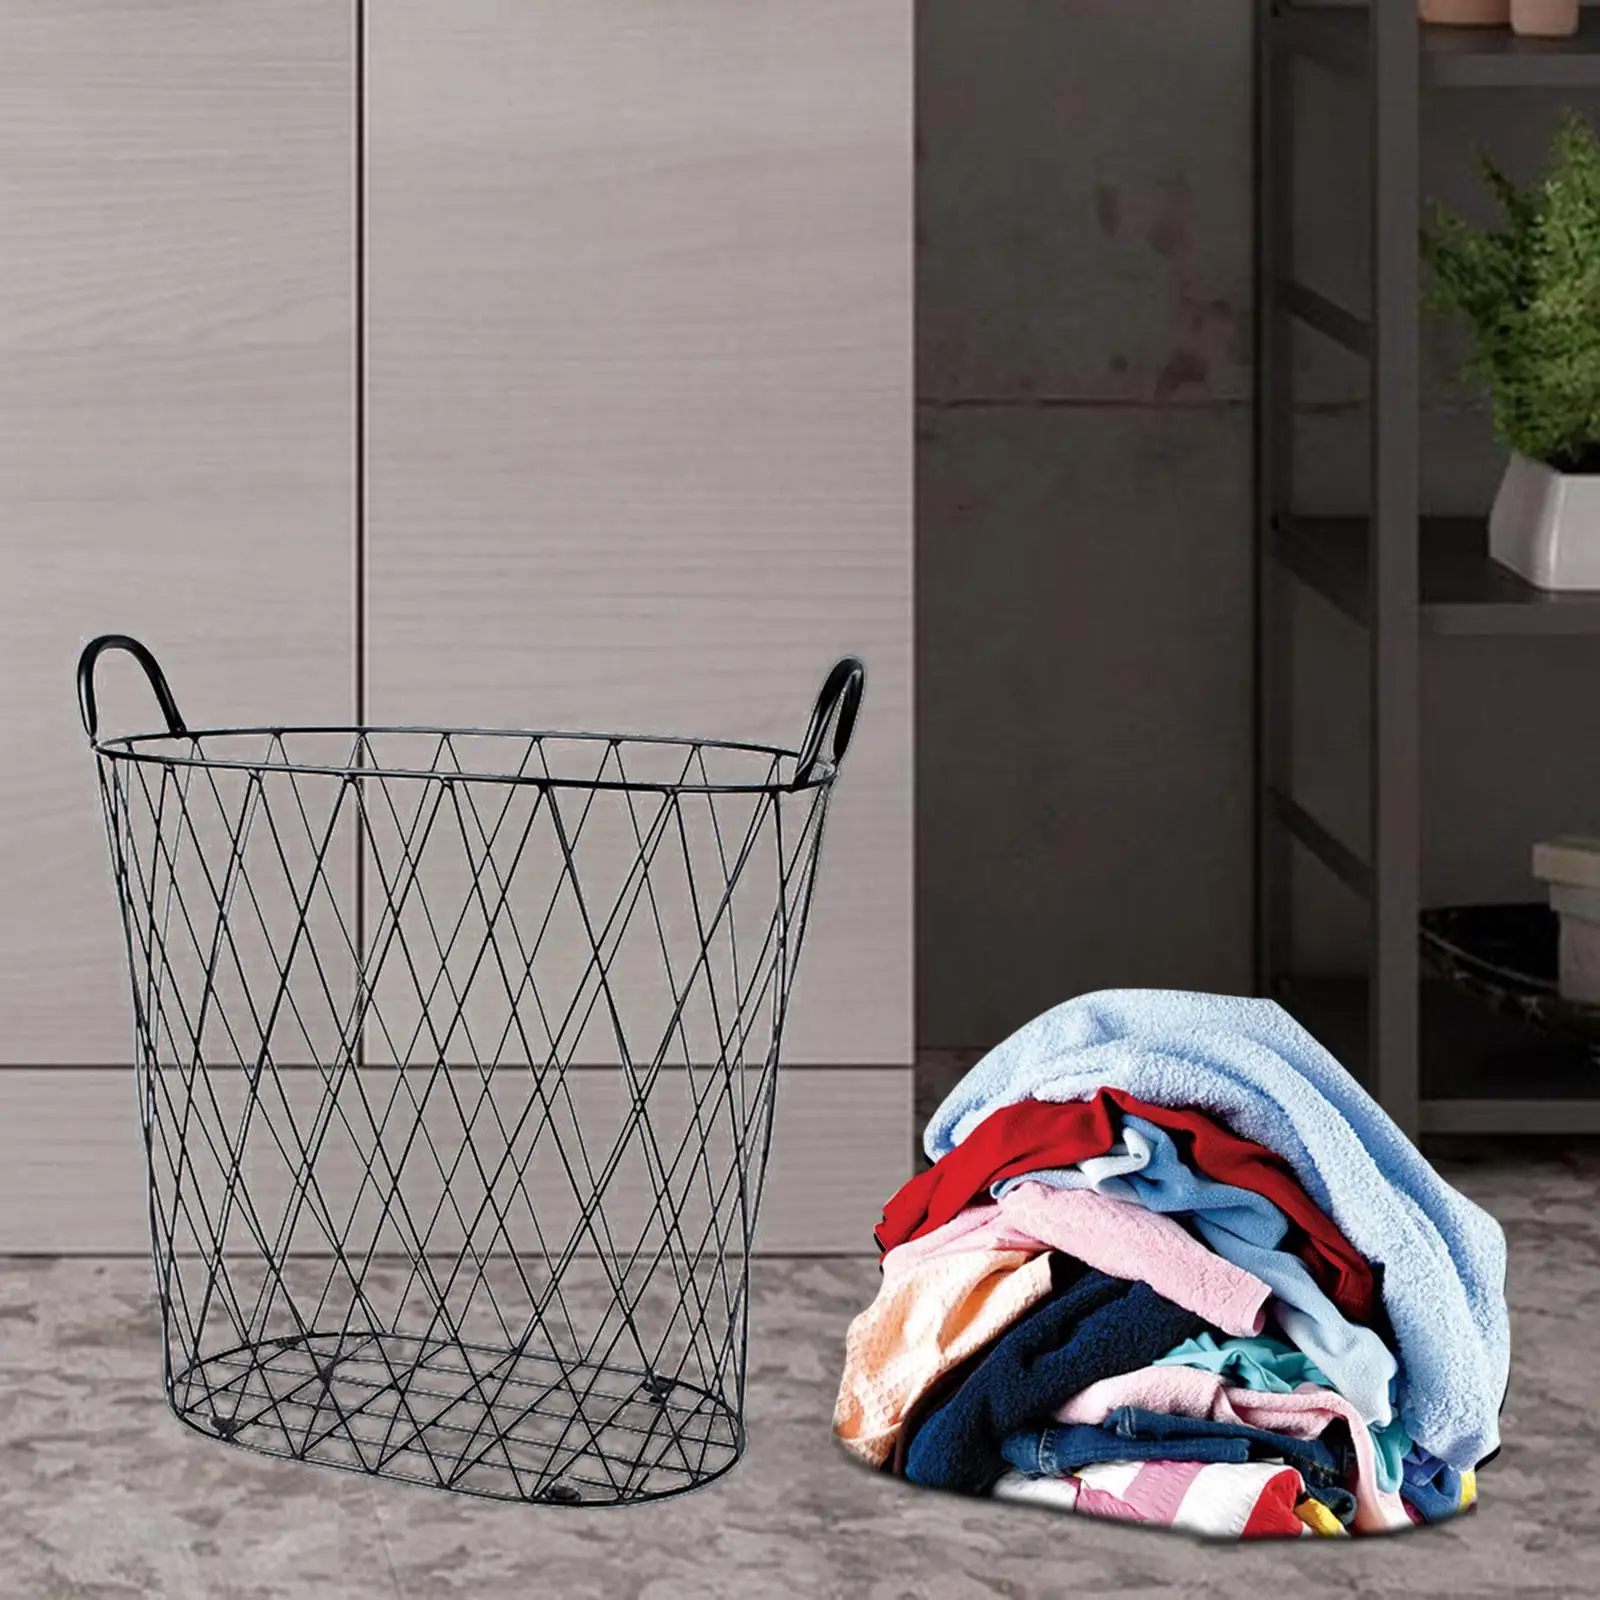 Metal Laundry Hamper Large Capacity with Handles Dirty Clothes Basket for Bathroom Laundry Room Bedroom Living Room Household